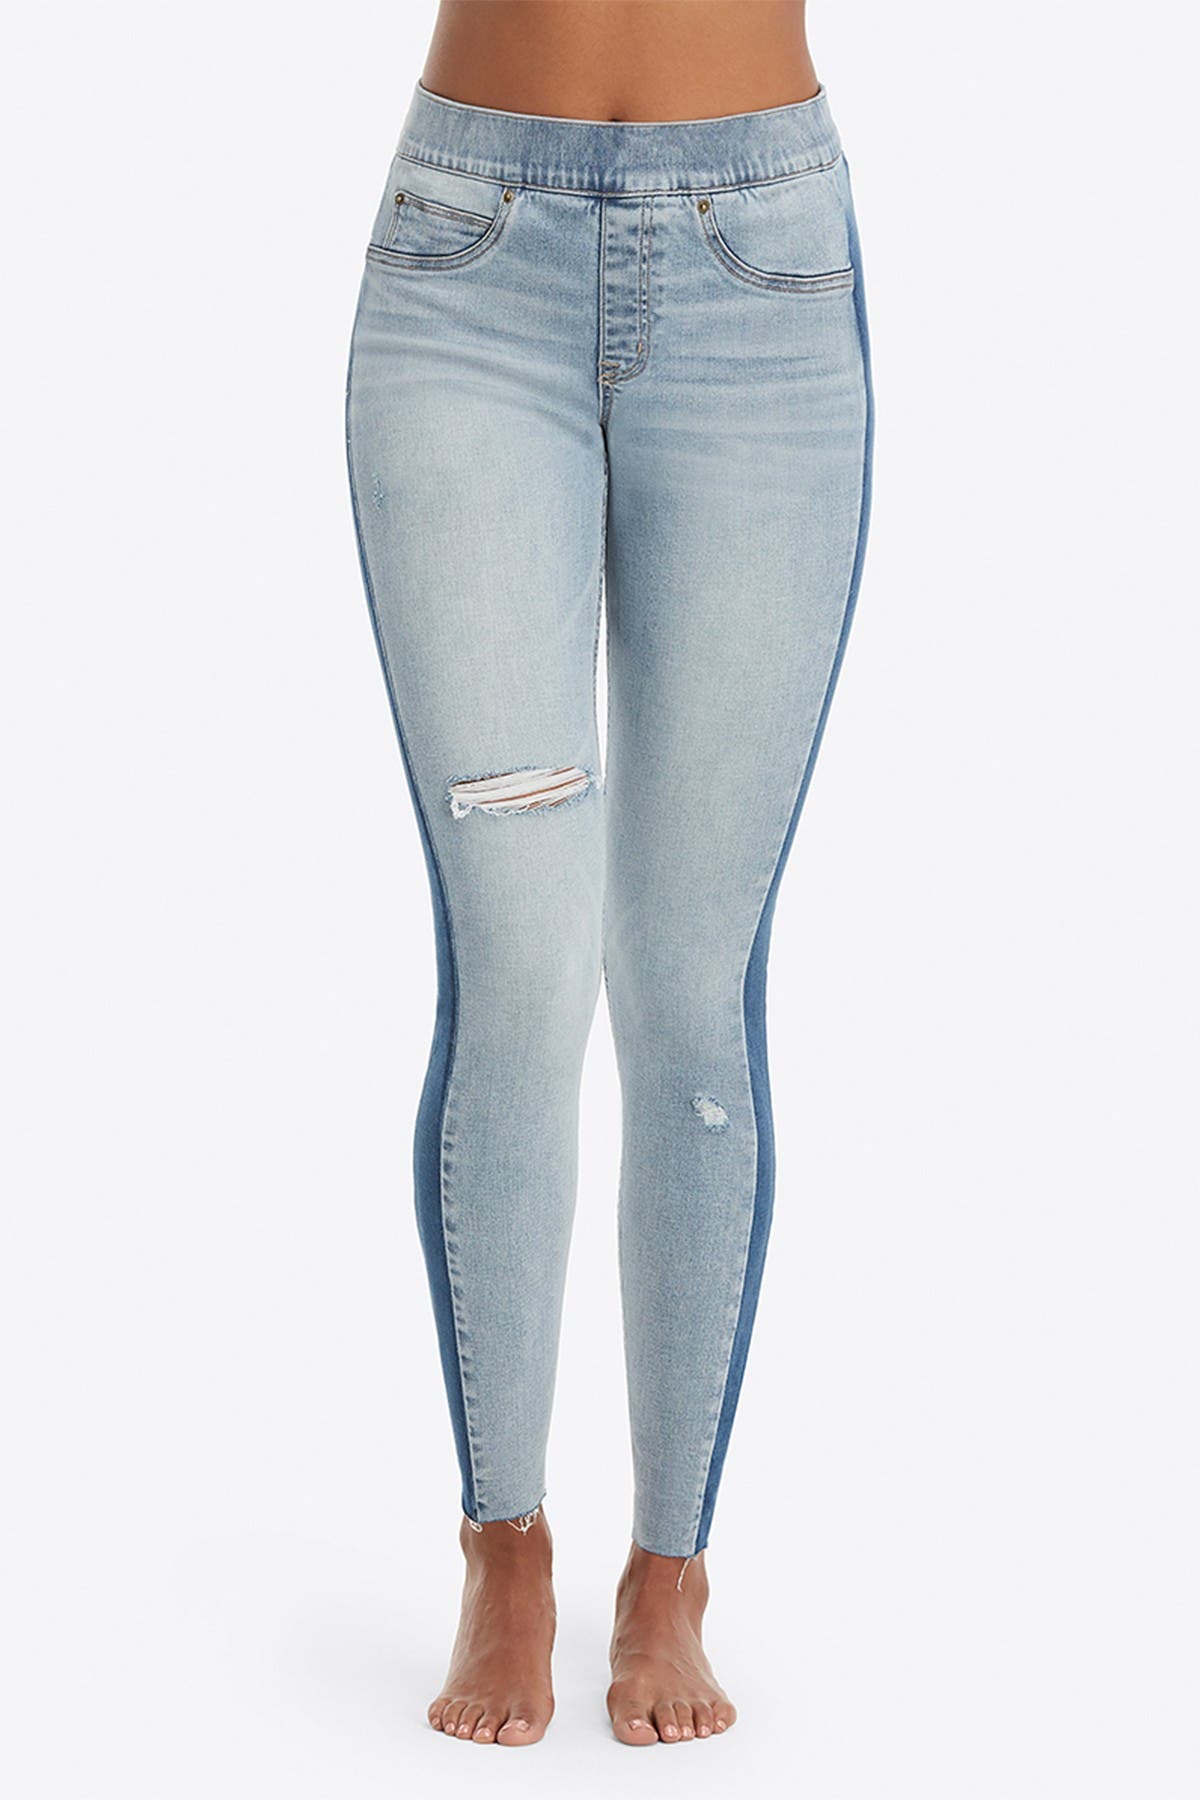 spanx distressed skinny jeans with side stripe